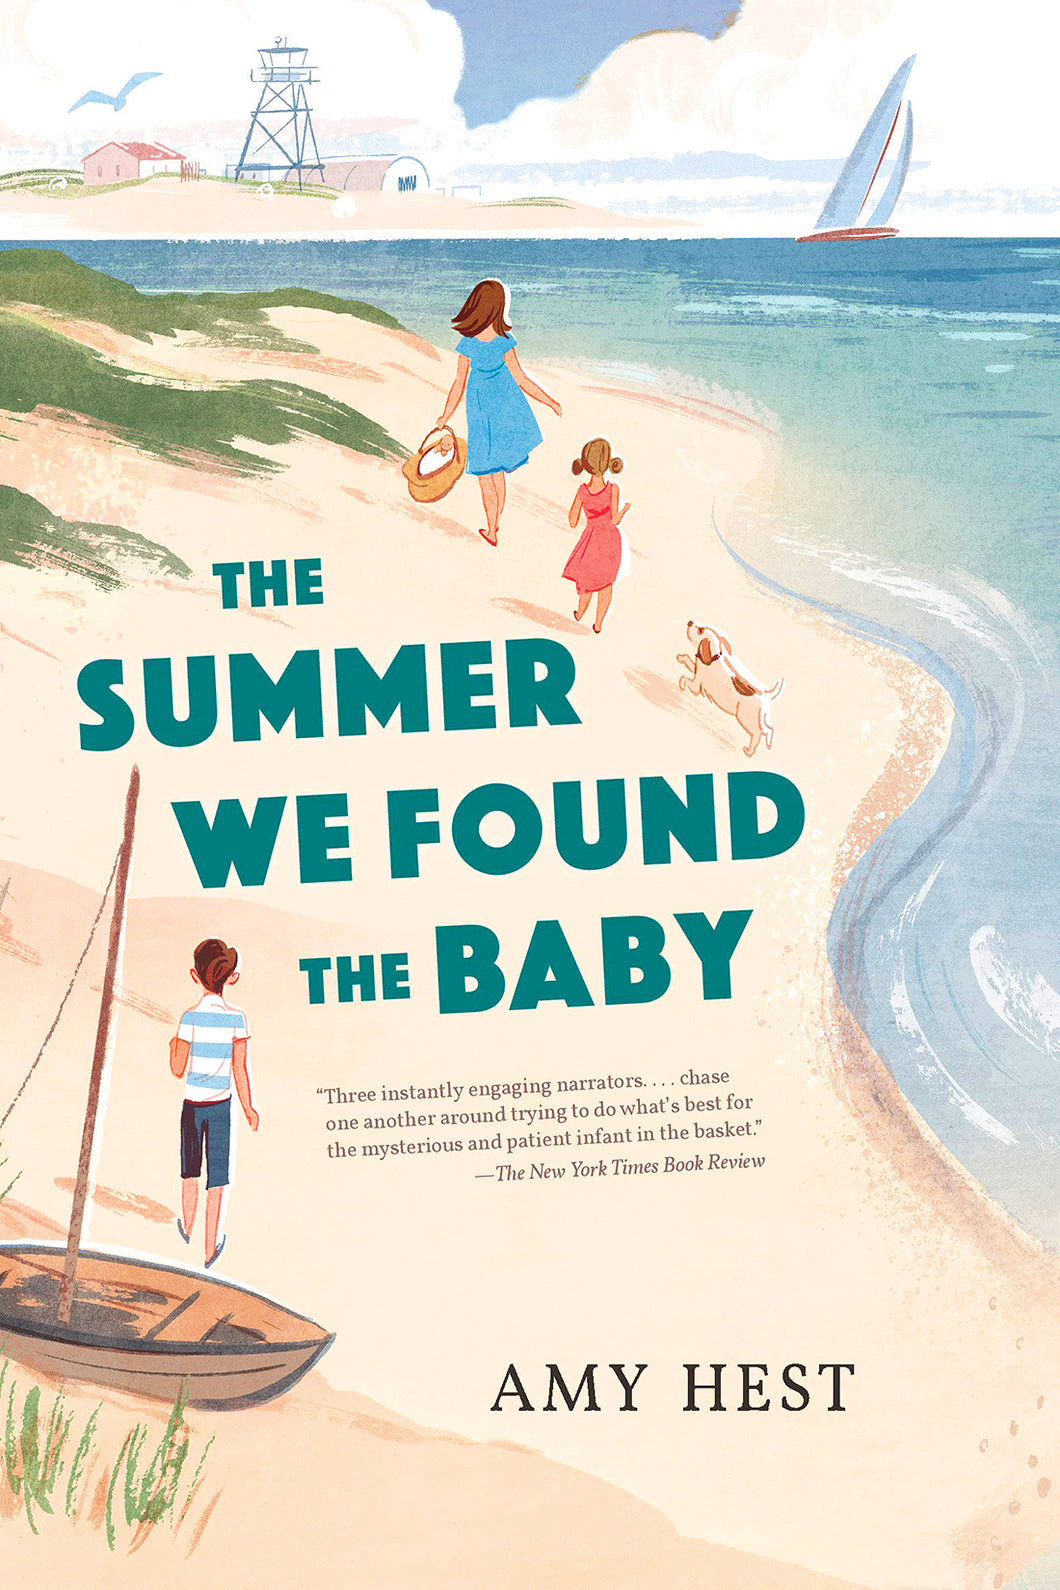 The Summer We Found the Baby by Amy Hest / Hardcover or Paperback - NEW BOOK